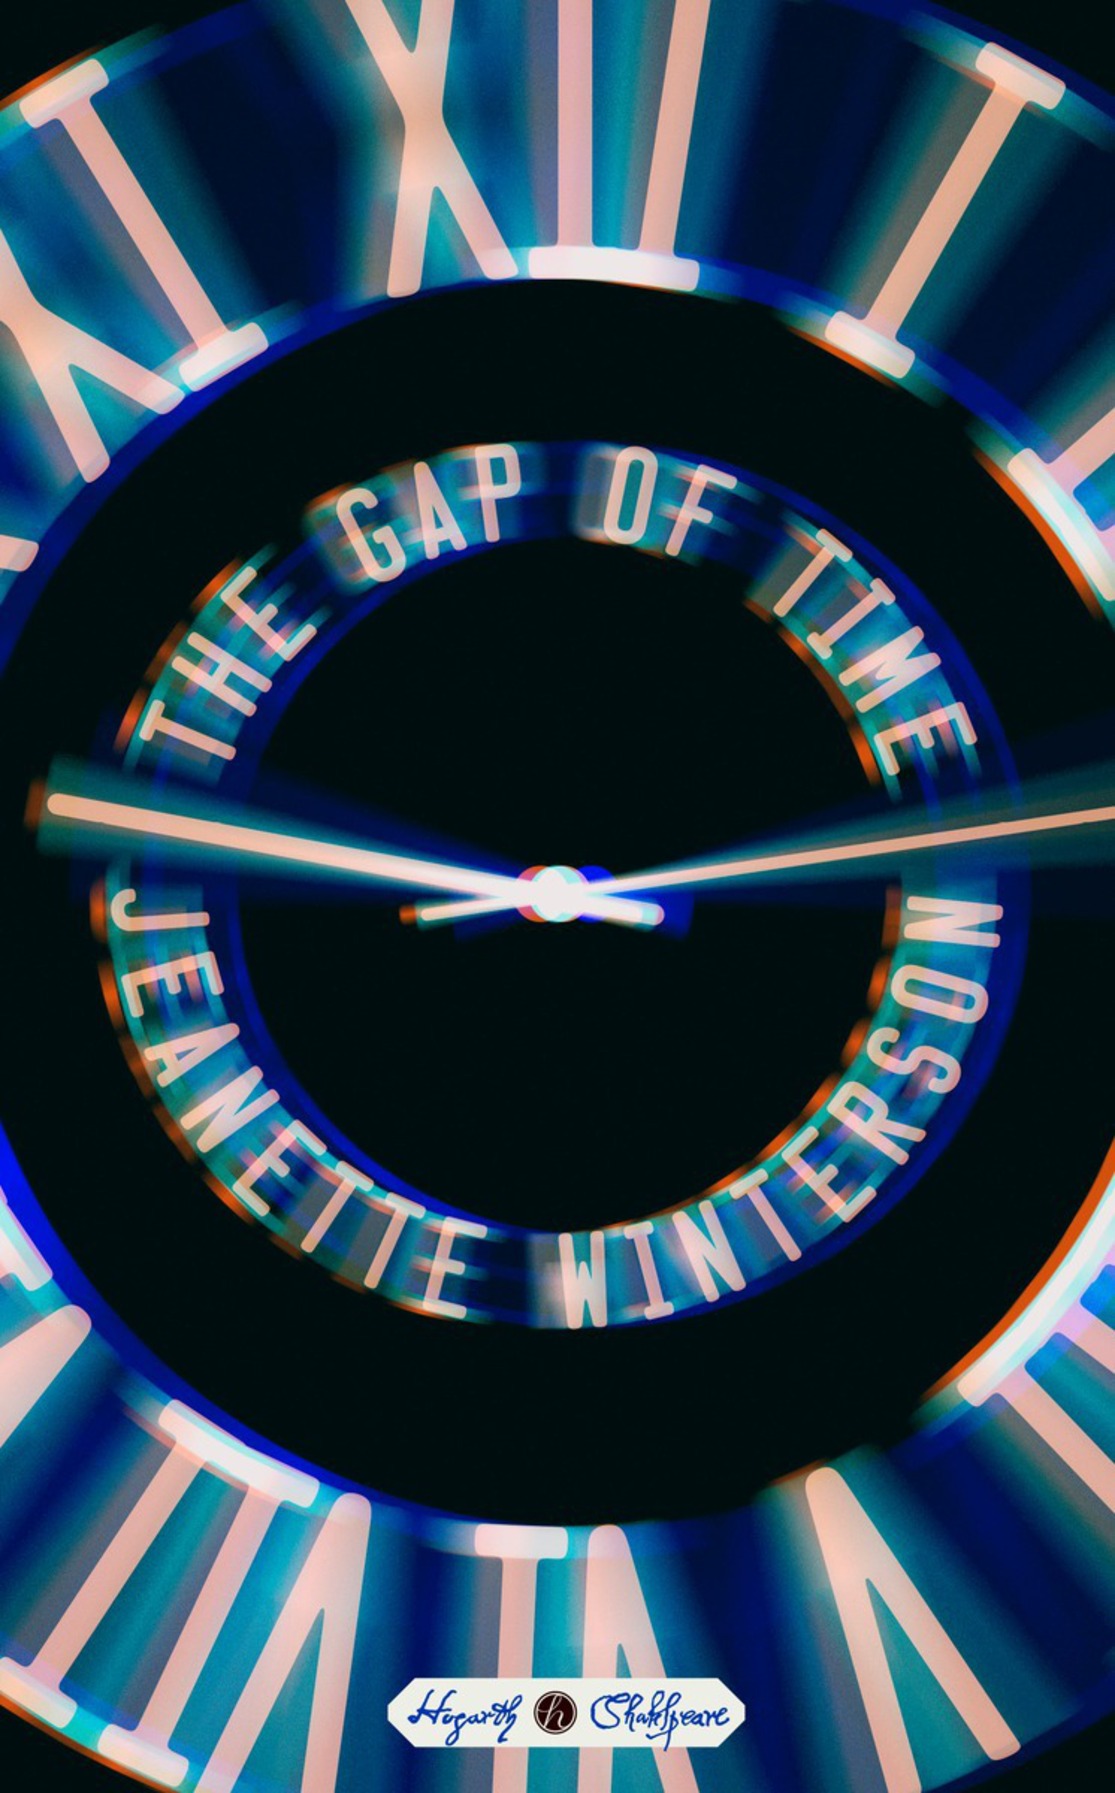 The Gap of Time (2015) by Jeanette Winterson